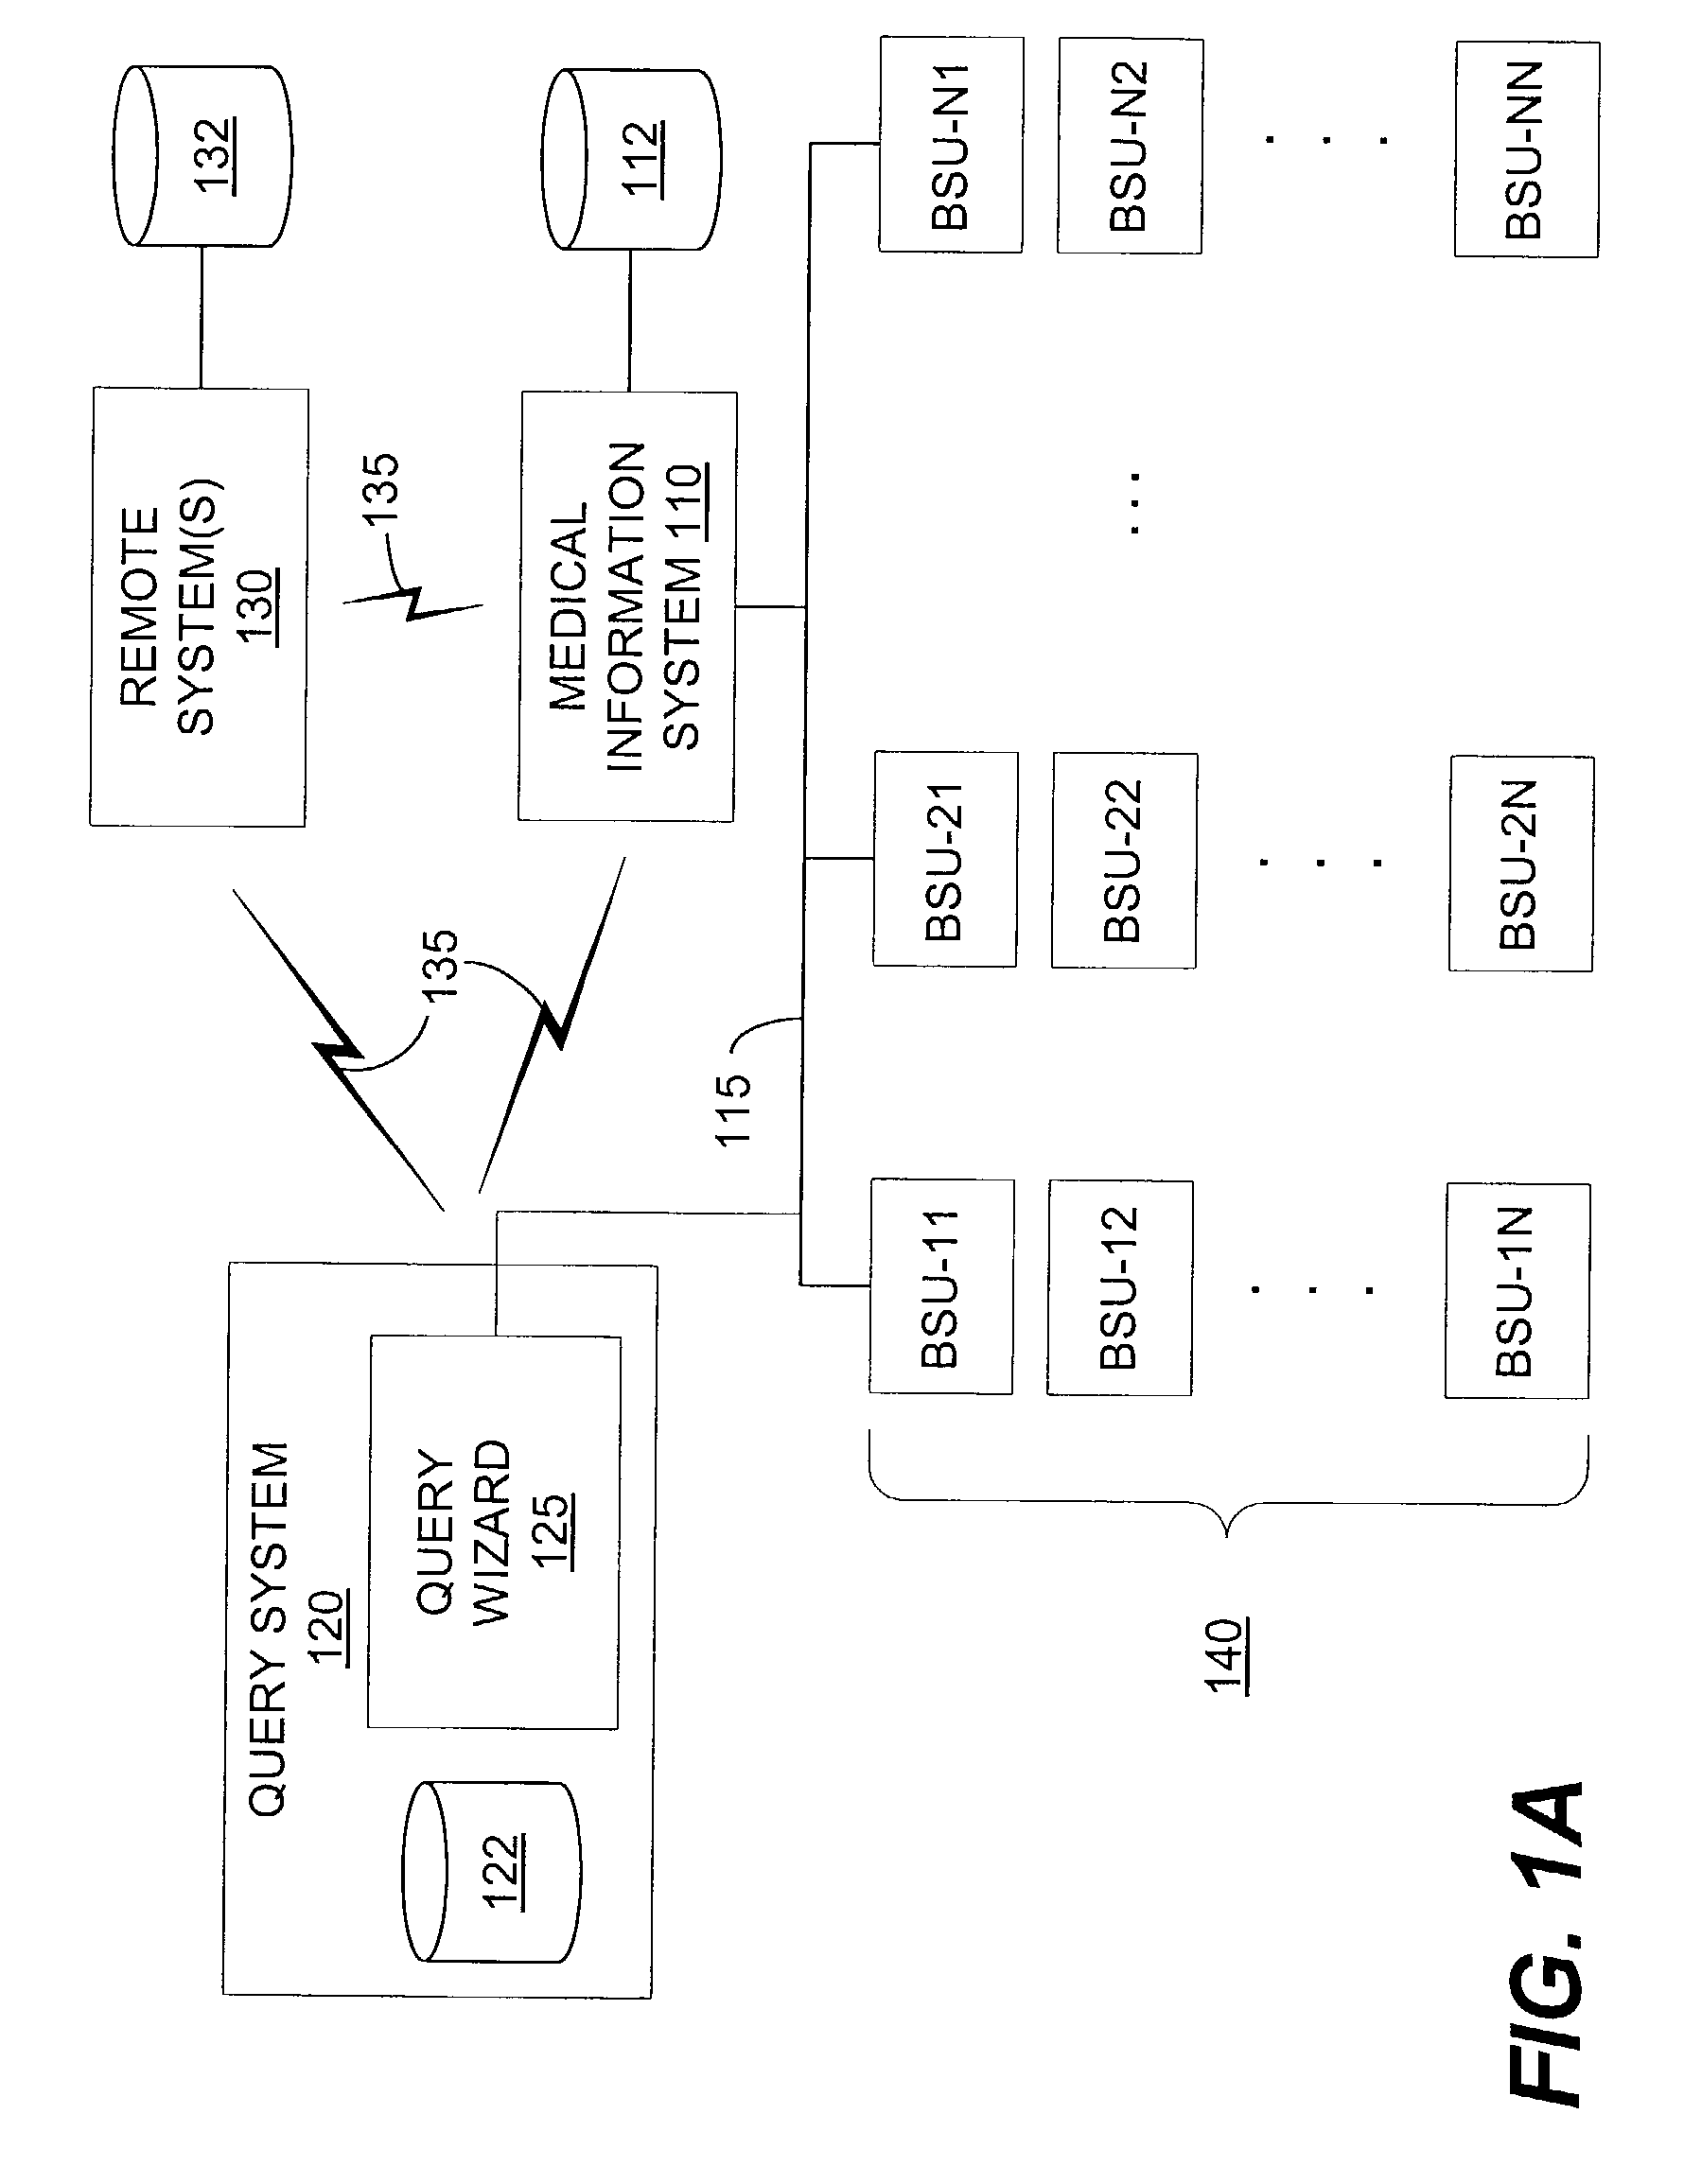 Medical information query system